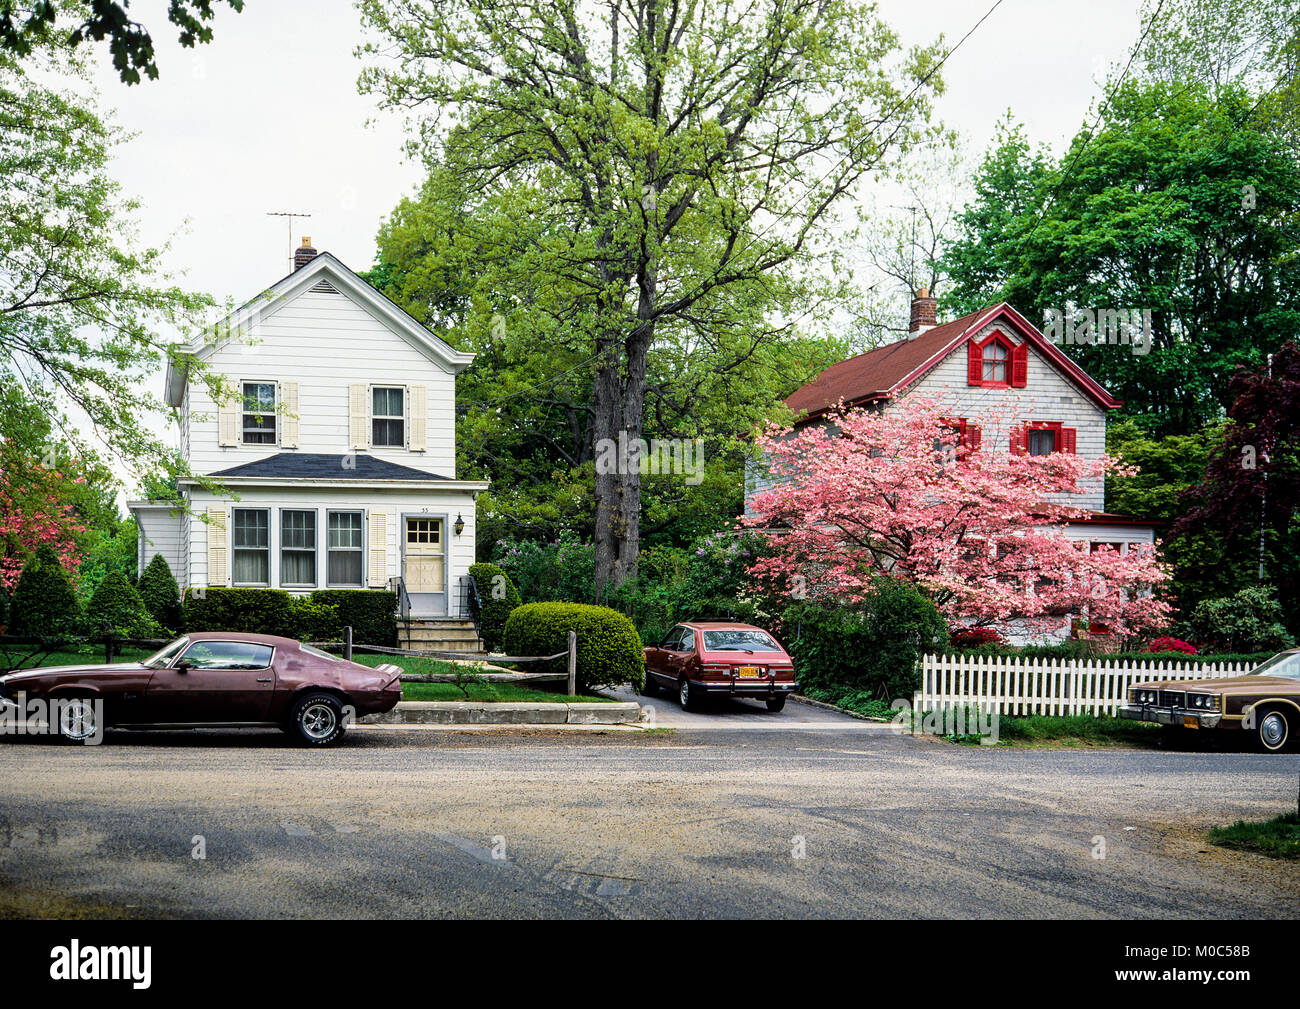 May 1982, white and red wooden detached houses, blooming pink dogwood tree, parked cars, spring, Long Island, New york, NY, USA, Stock Photo